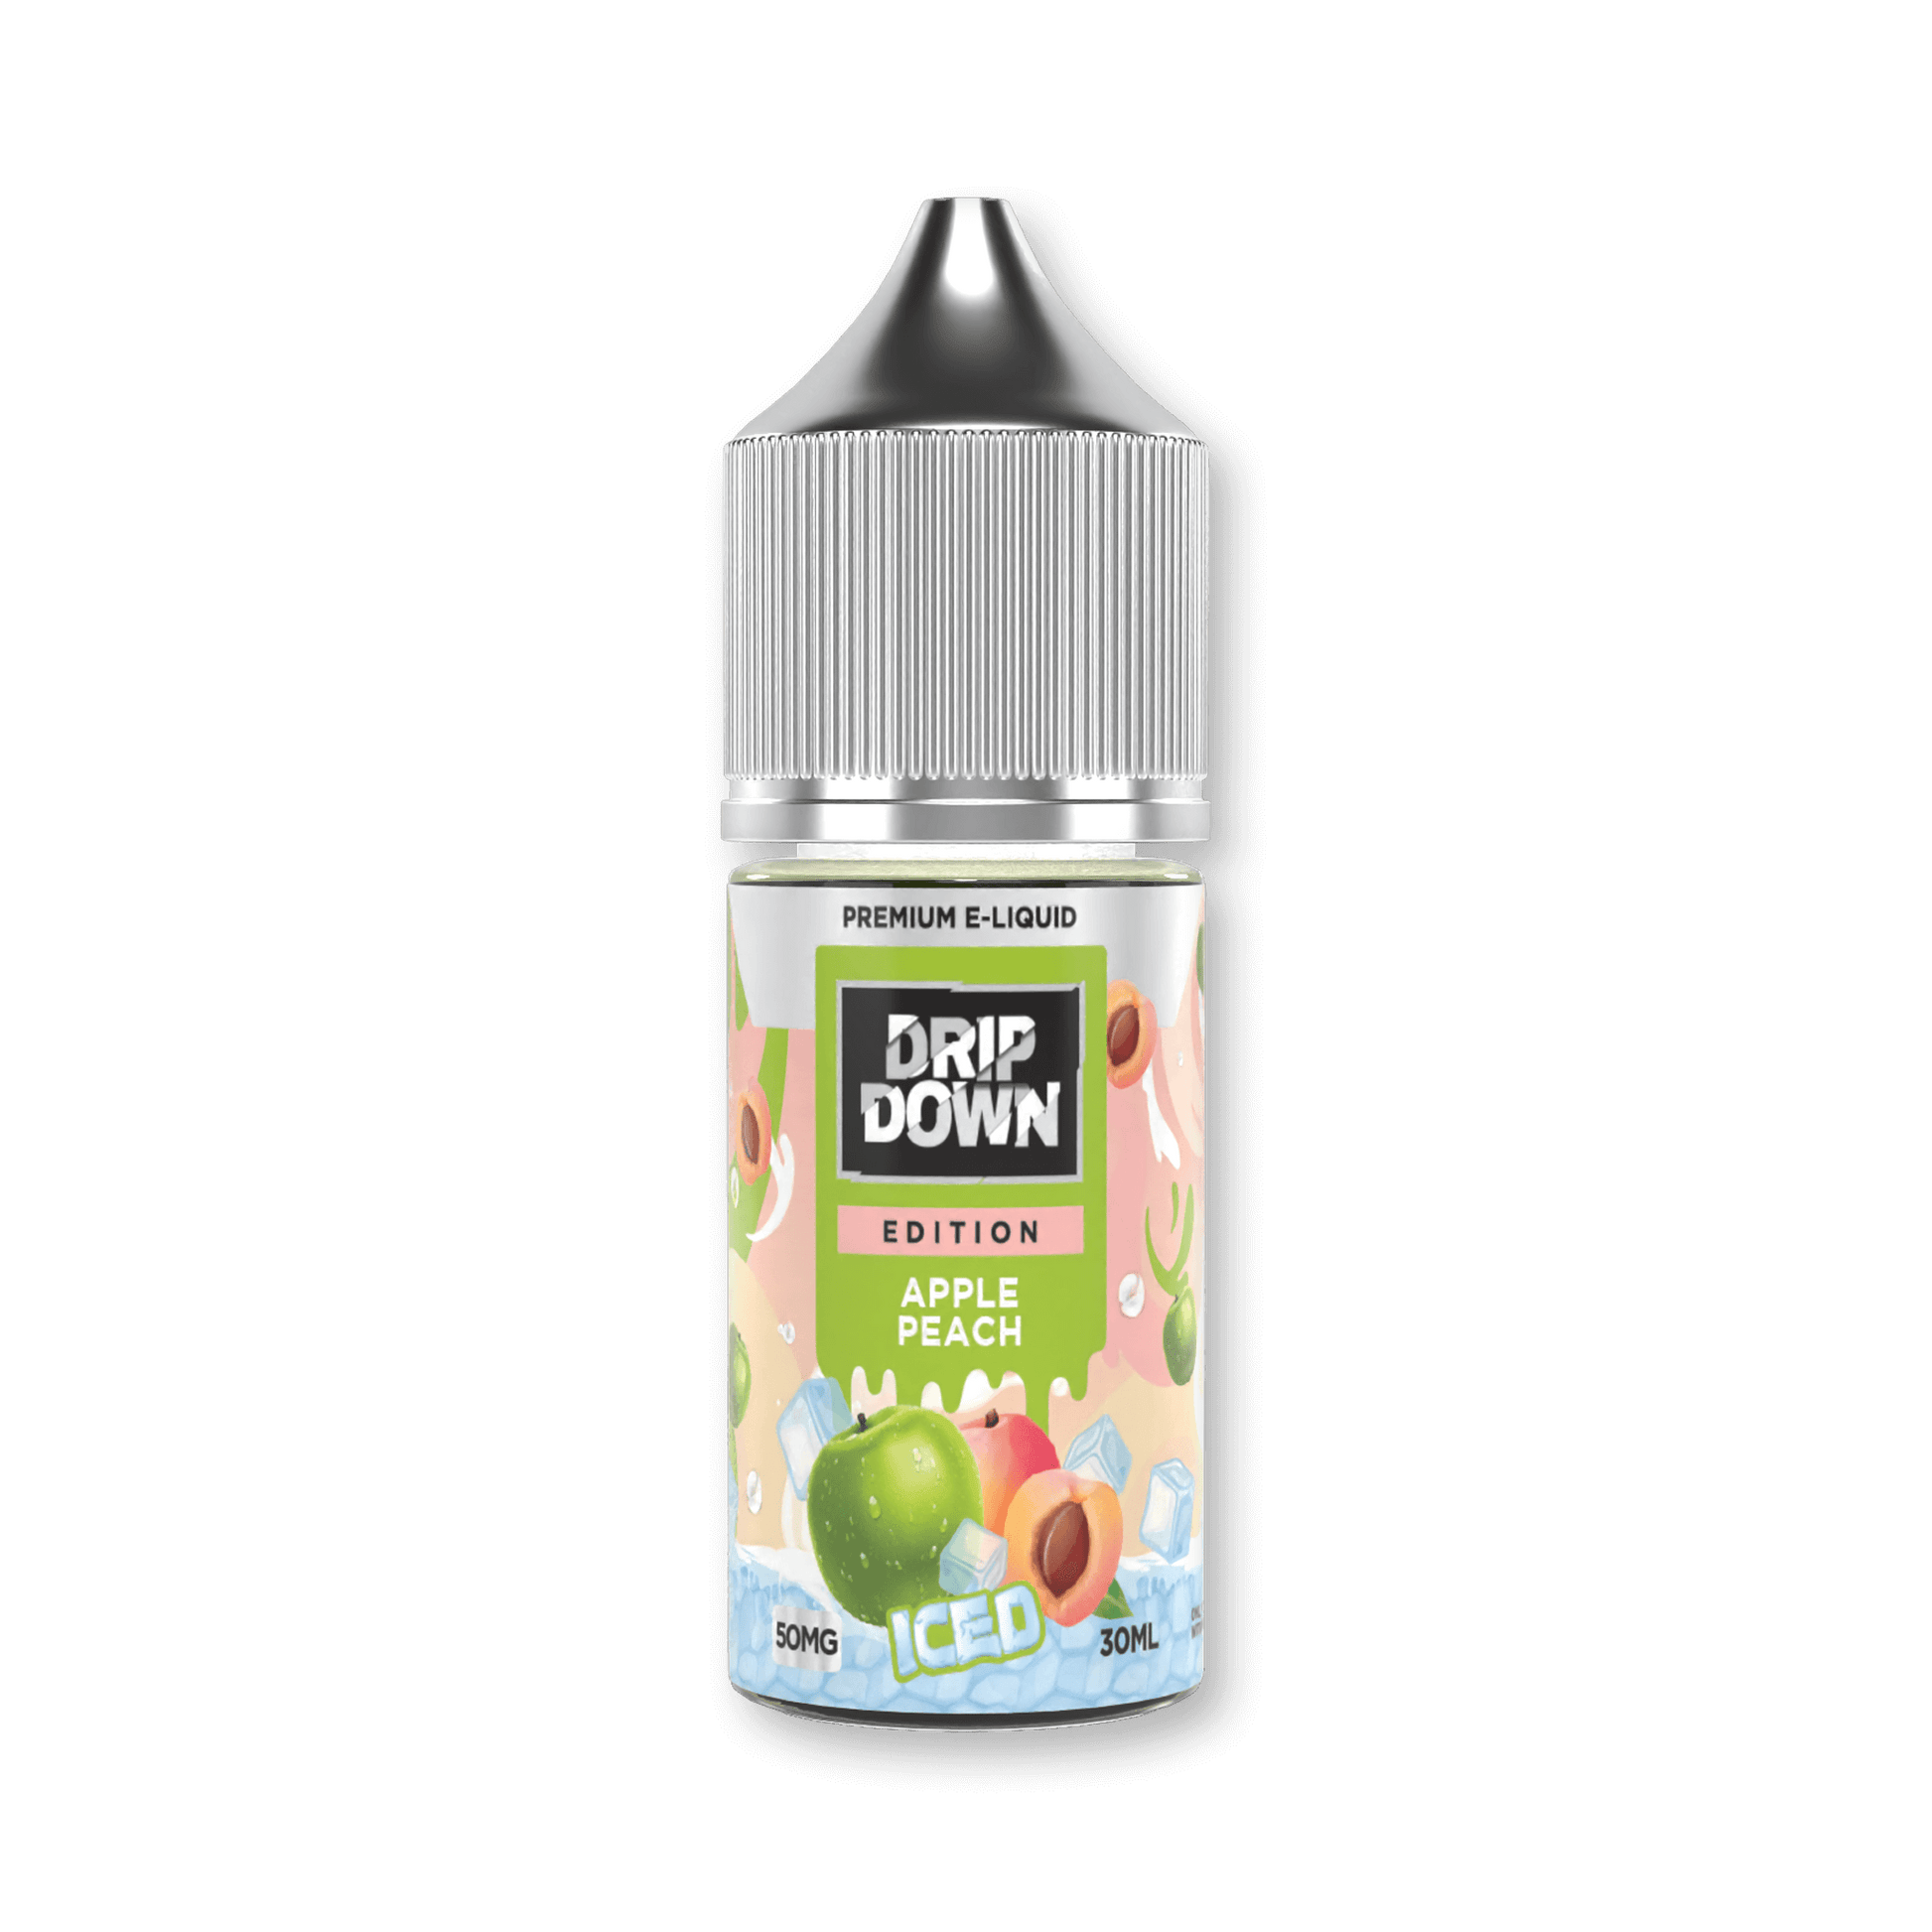 APPLE PEACH - DRIP DOWN EDITION SERIES E-LIQUID - 30ML - ICONA VAPE25MGApple Peach E-Liquid DRIP DOWN Edition Series 30ml bottle Fruity adventure Harmony of crisp apples Succulent peaches Meticulously crafted Tantalizing vaping experience ICONA VAPE Shop now Flavor: Apple, Peach, ICE Series: Edition Size: 30ml Nicotine Strength: 25mg, 50mg Child Resistant Cap